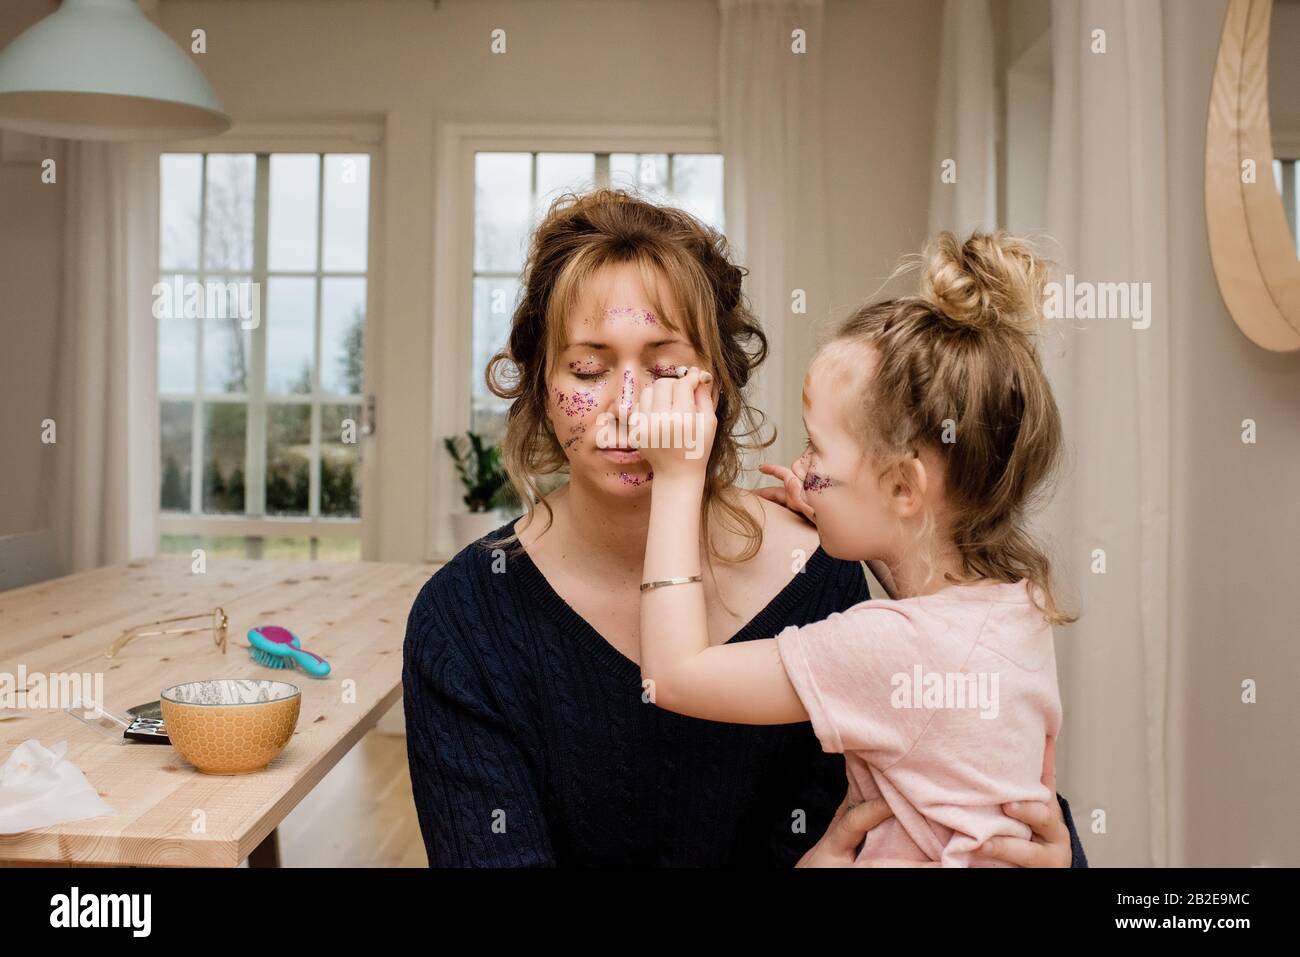 mother and daughter playing dress up with make up & glitter together Stock Photo